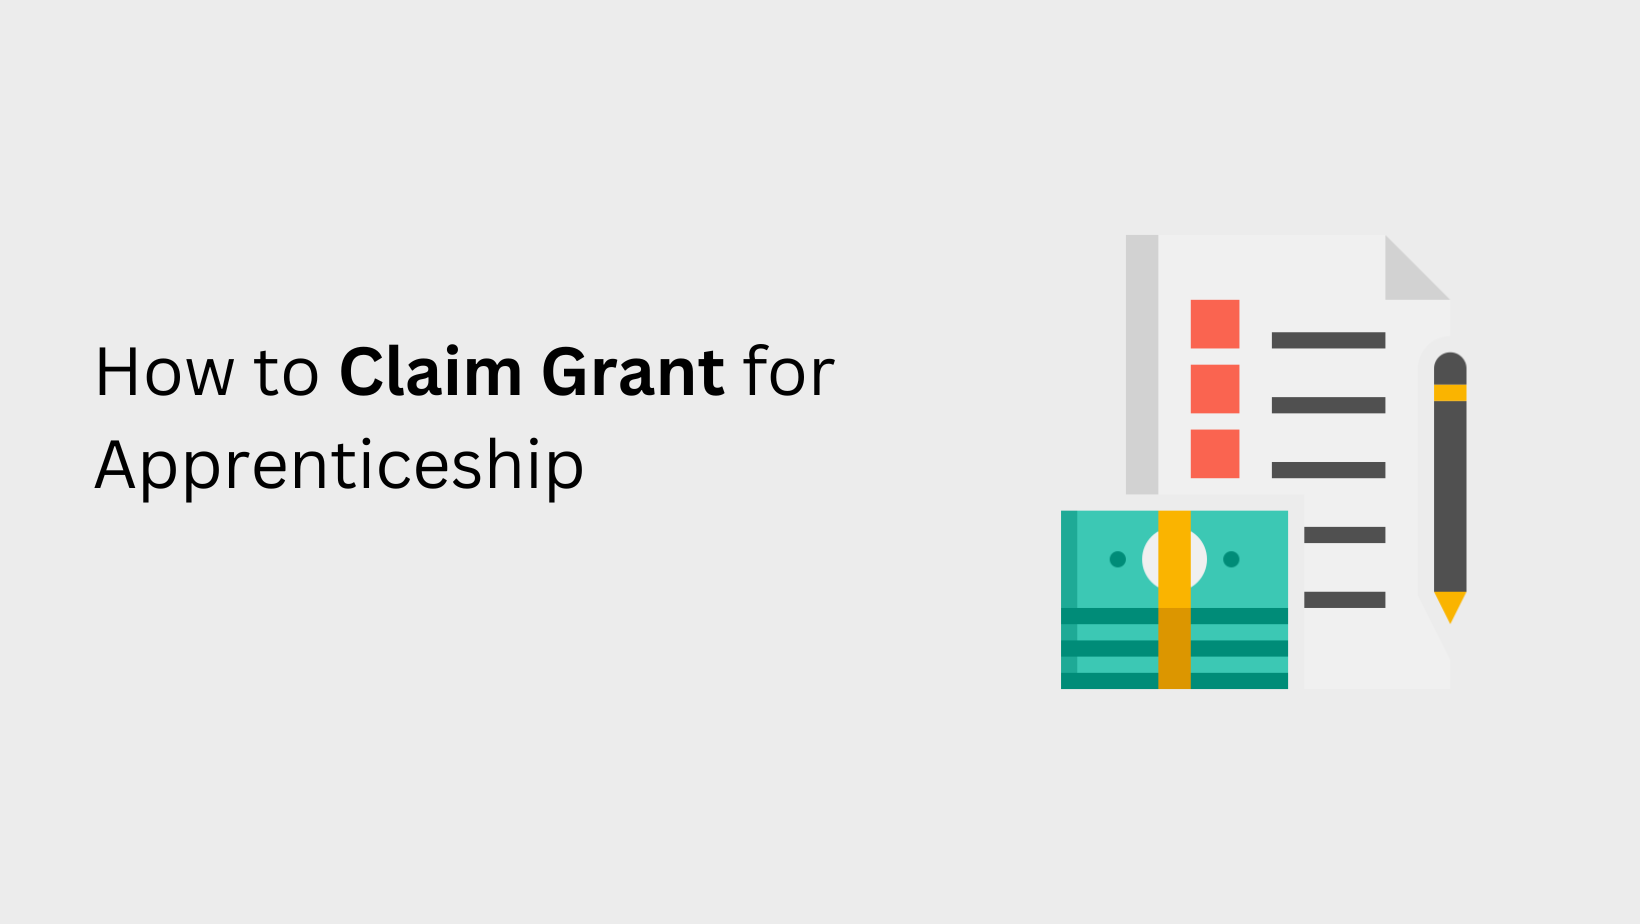 How to Claim Grant for Apprenticeship